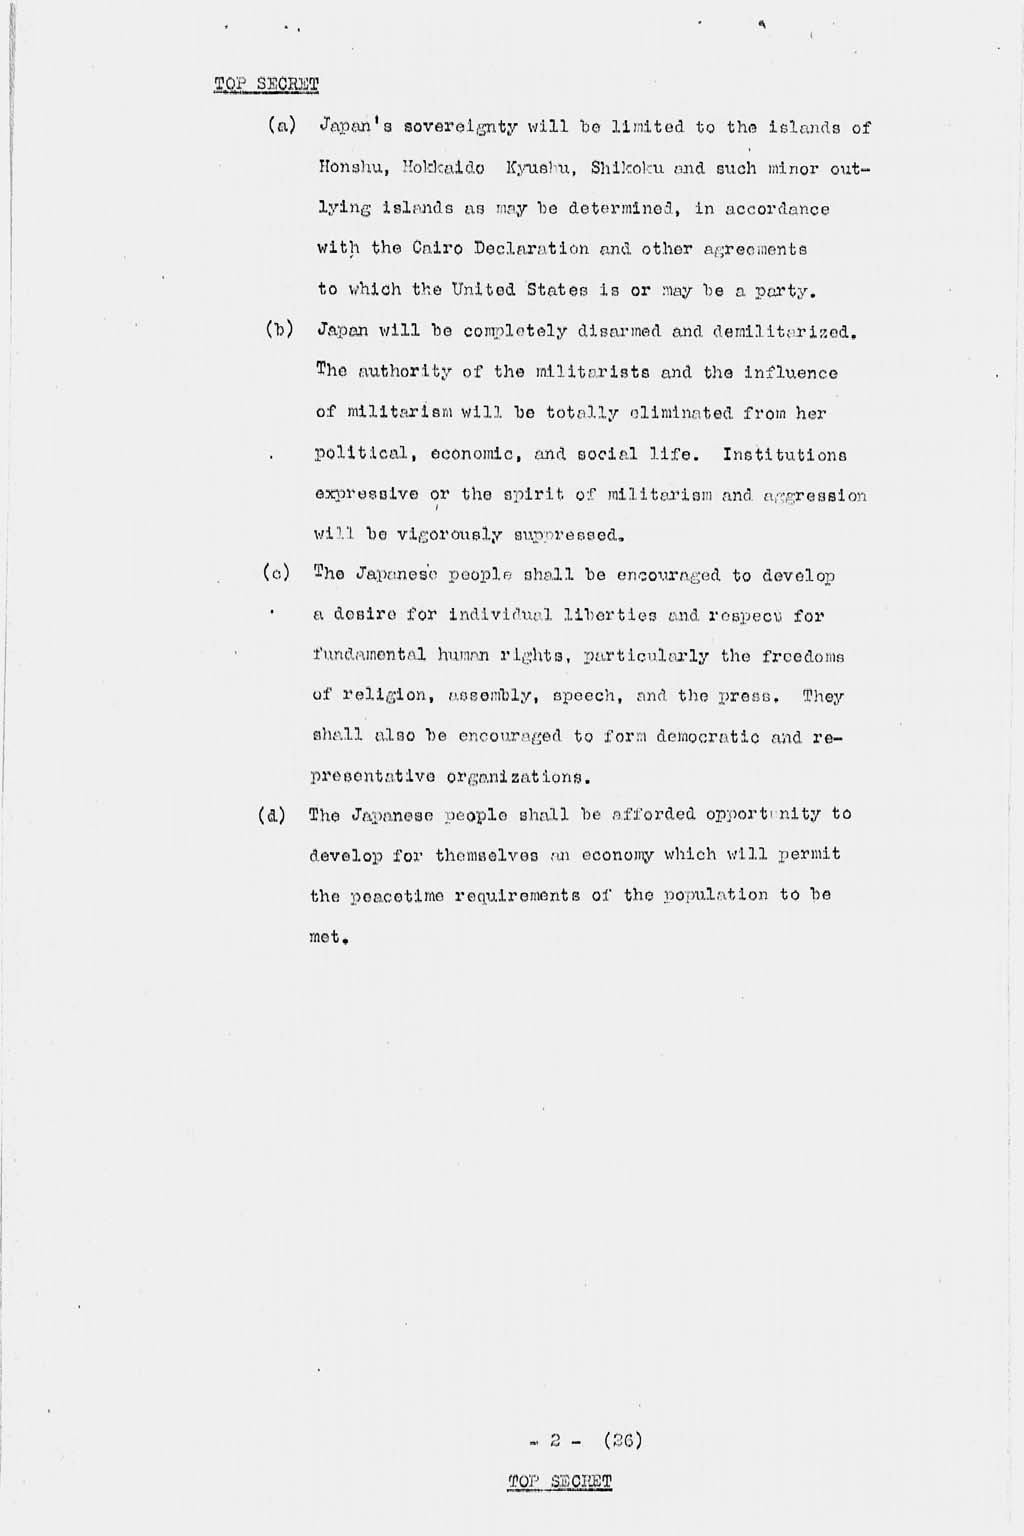 [U.S. Initial Post-Surrender Policy for Japan (SWNCC150/3)](Larger image)